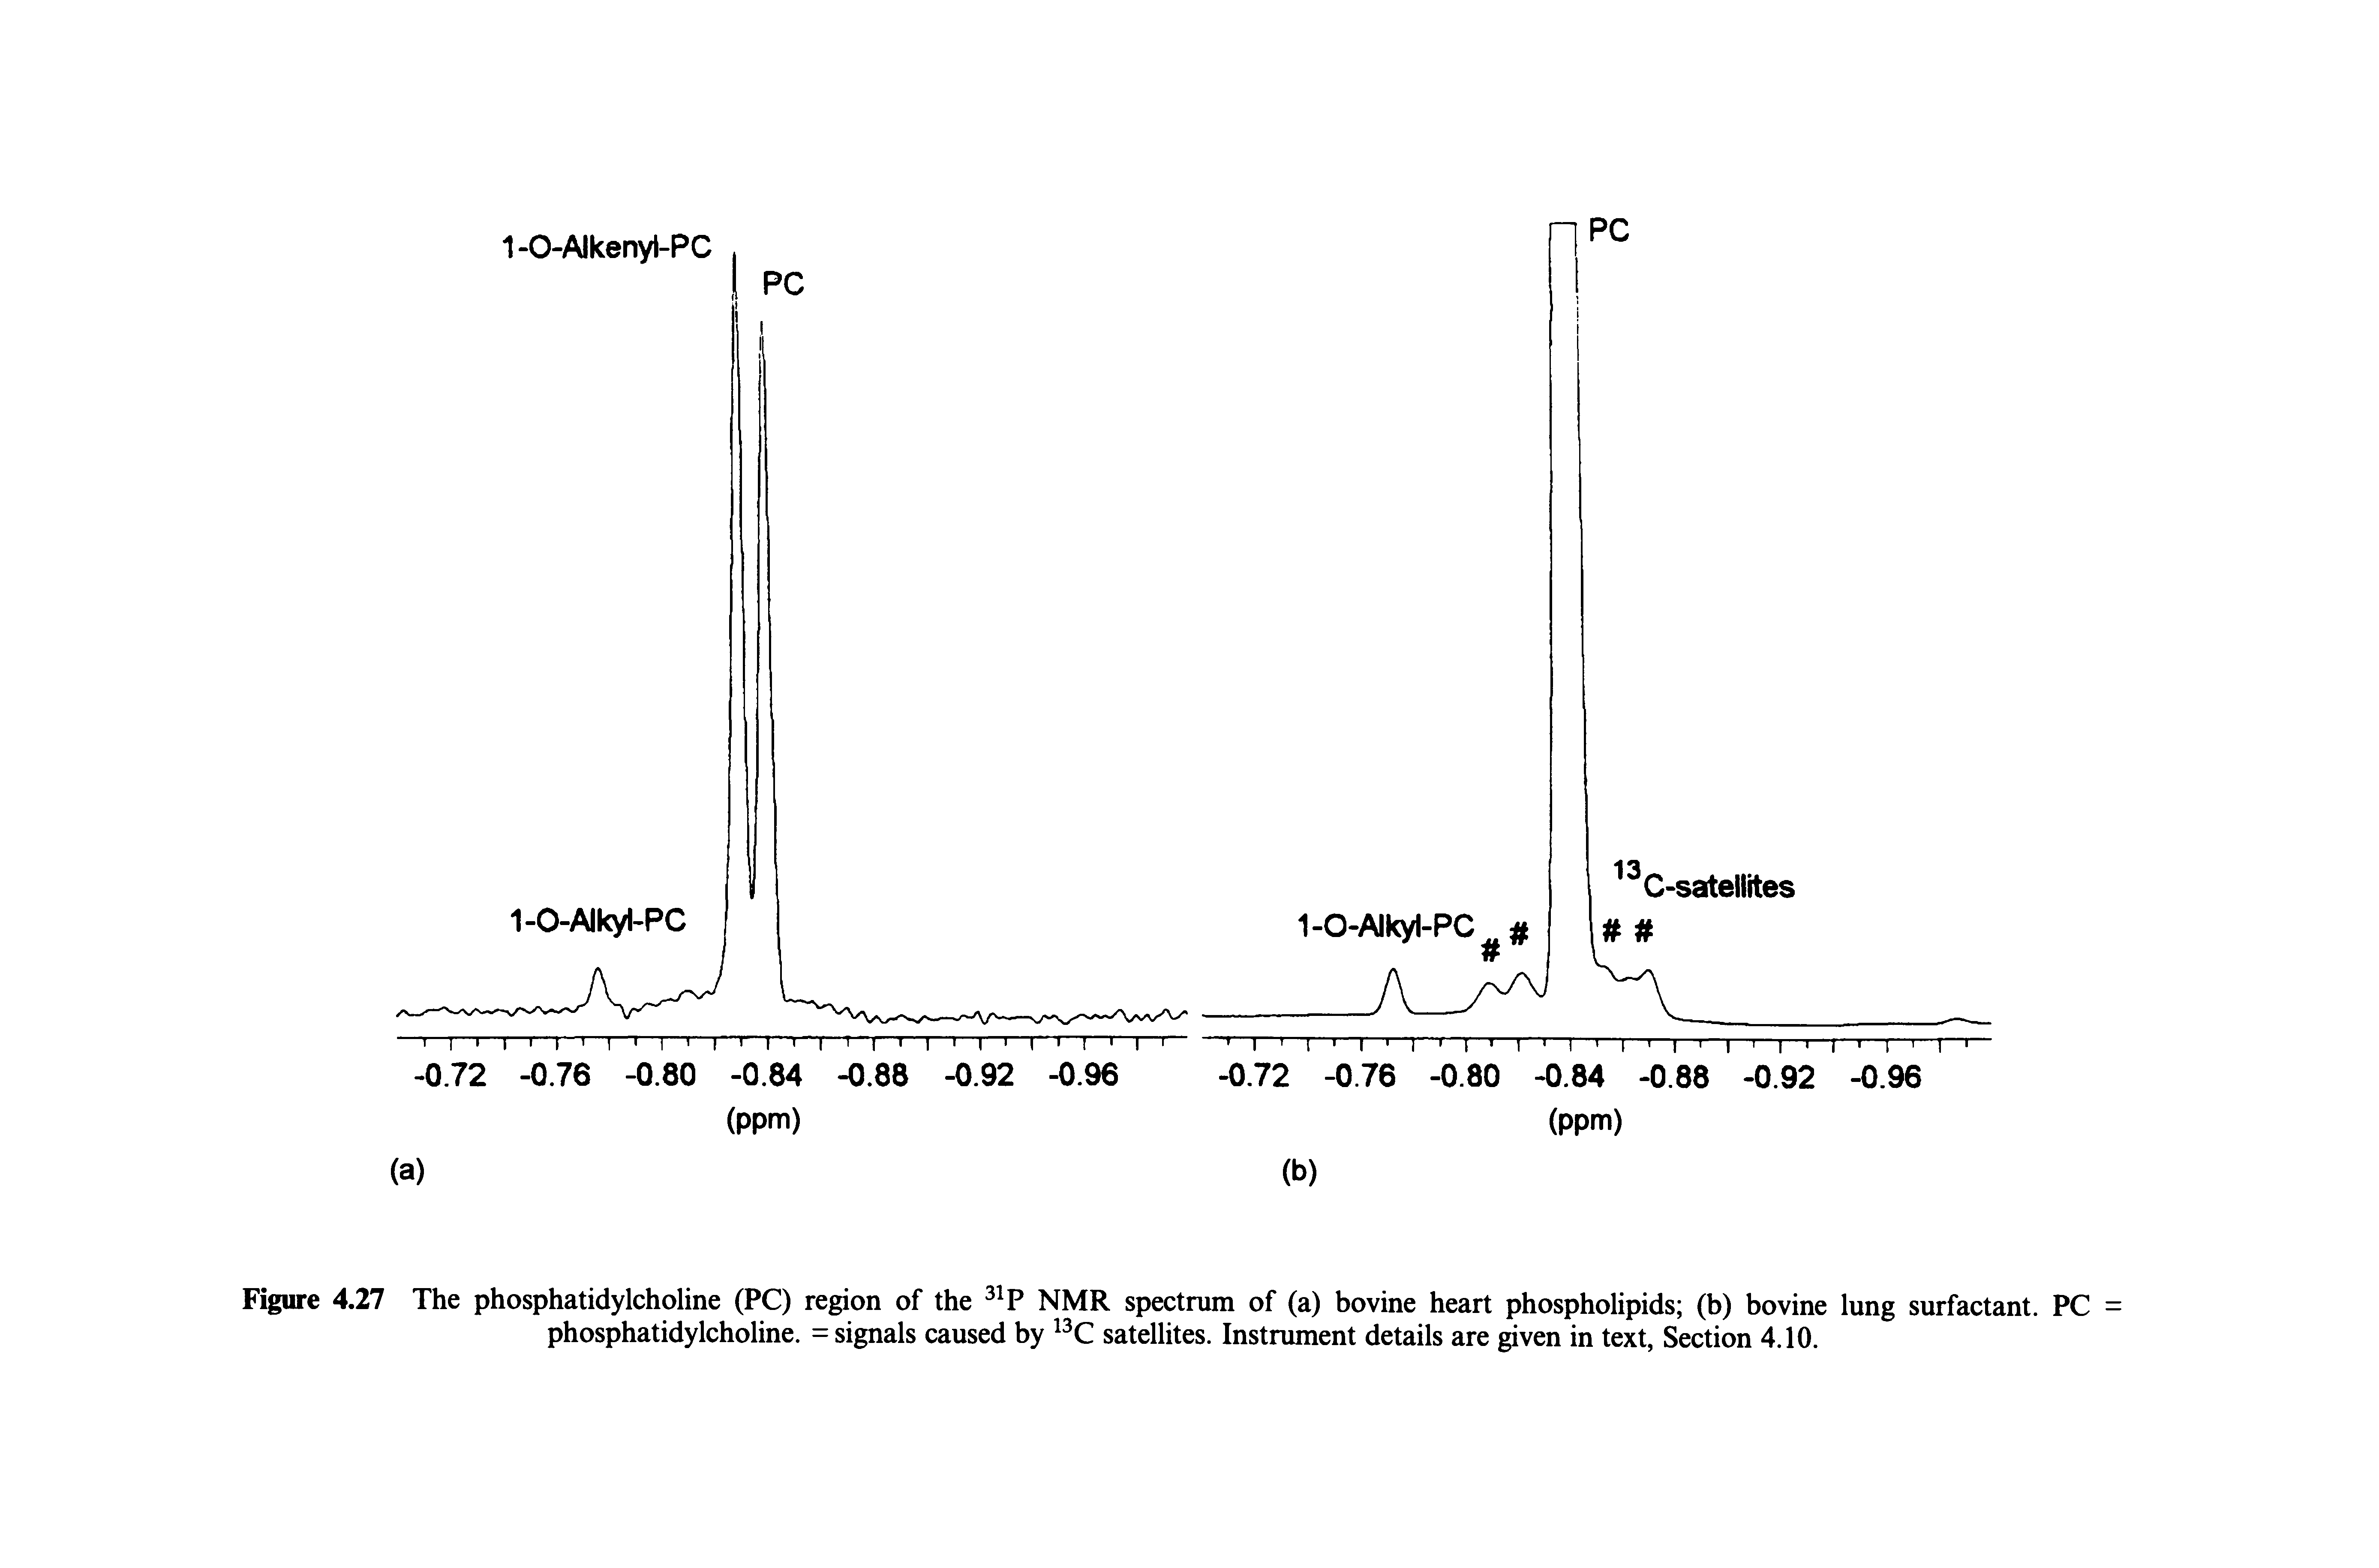 Figure 4.27 The phosphatidylcholine (PC) region of the NMR spectrum of (a) bovine heart phospholipids (b) bovine lung surfactant. PC phosphatidylcholine. = signals caused by C satellites. Instrument details are given in text, Section 4.10.